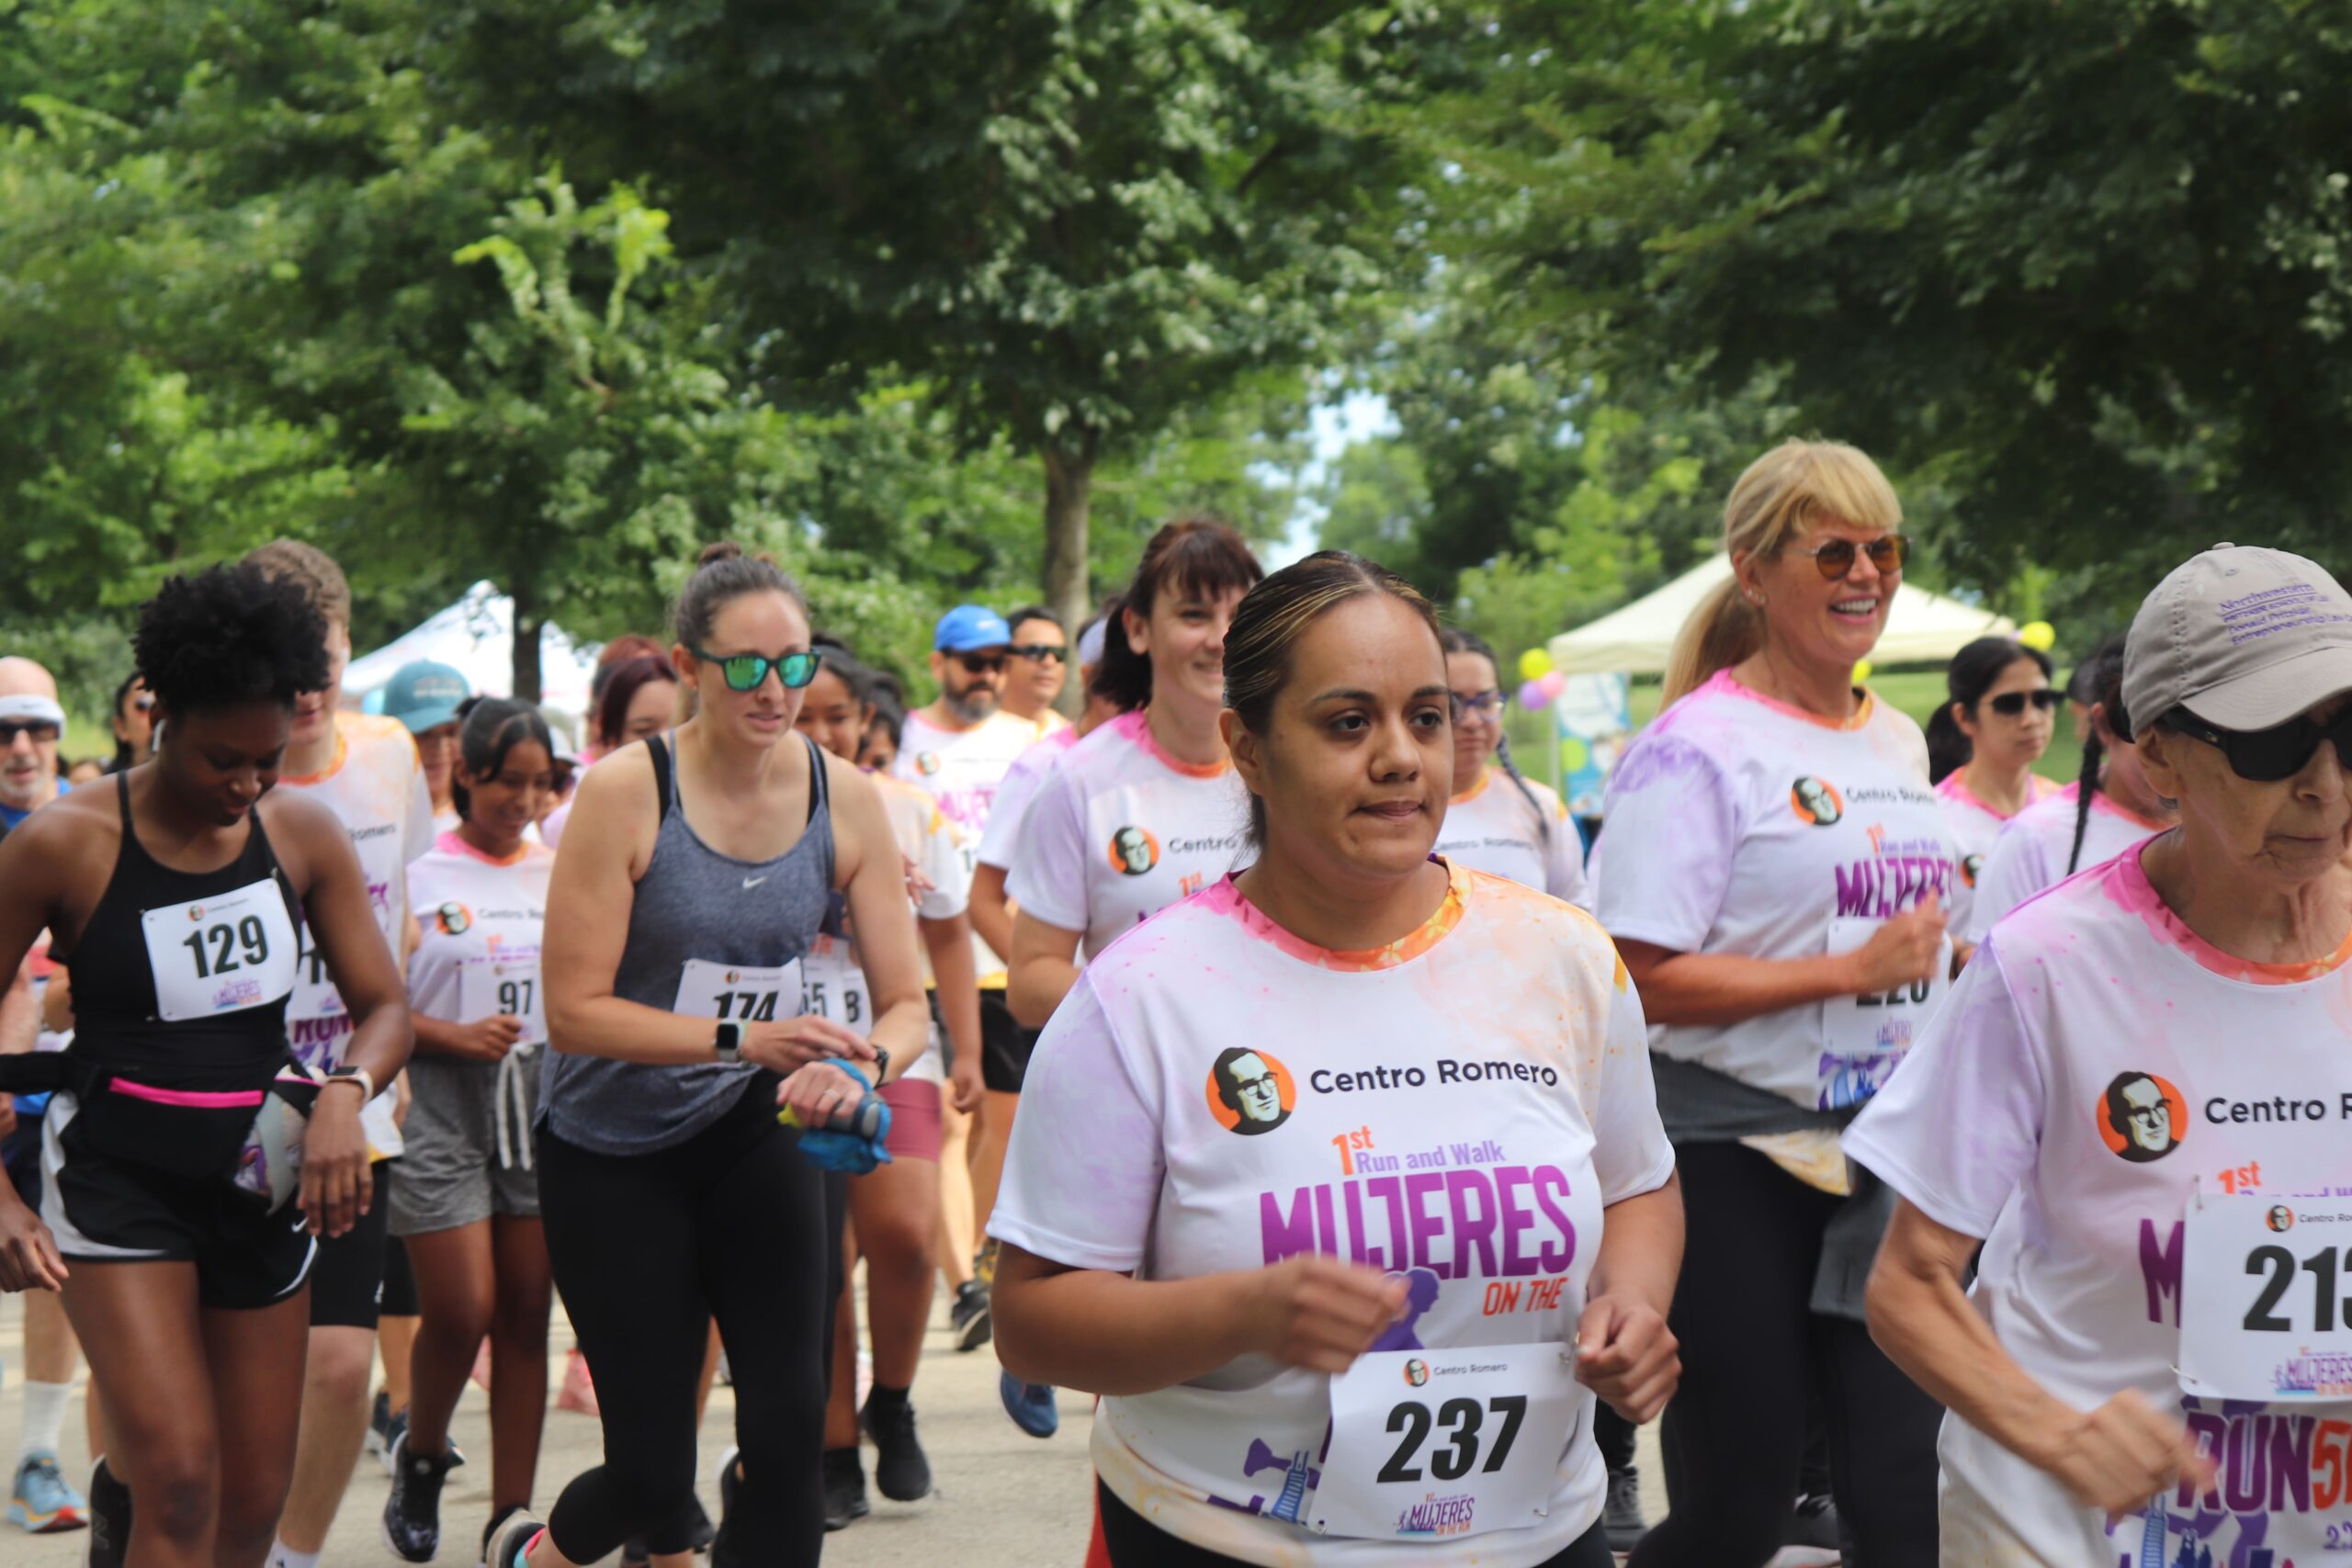 Mujeres on the Run 5k - Chicago